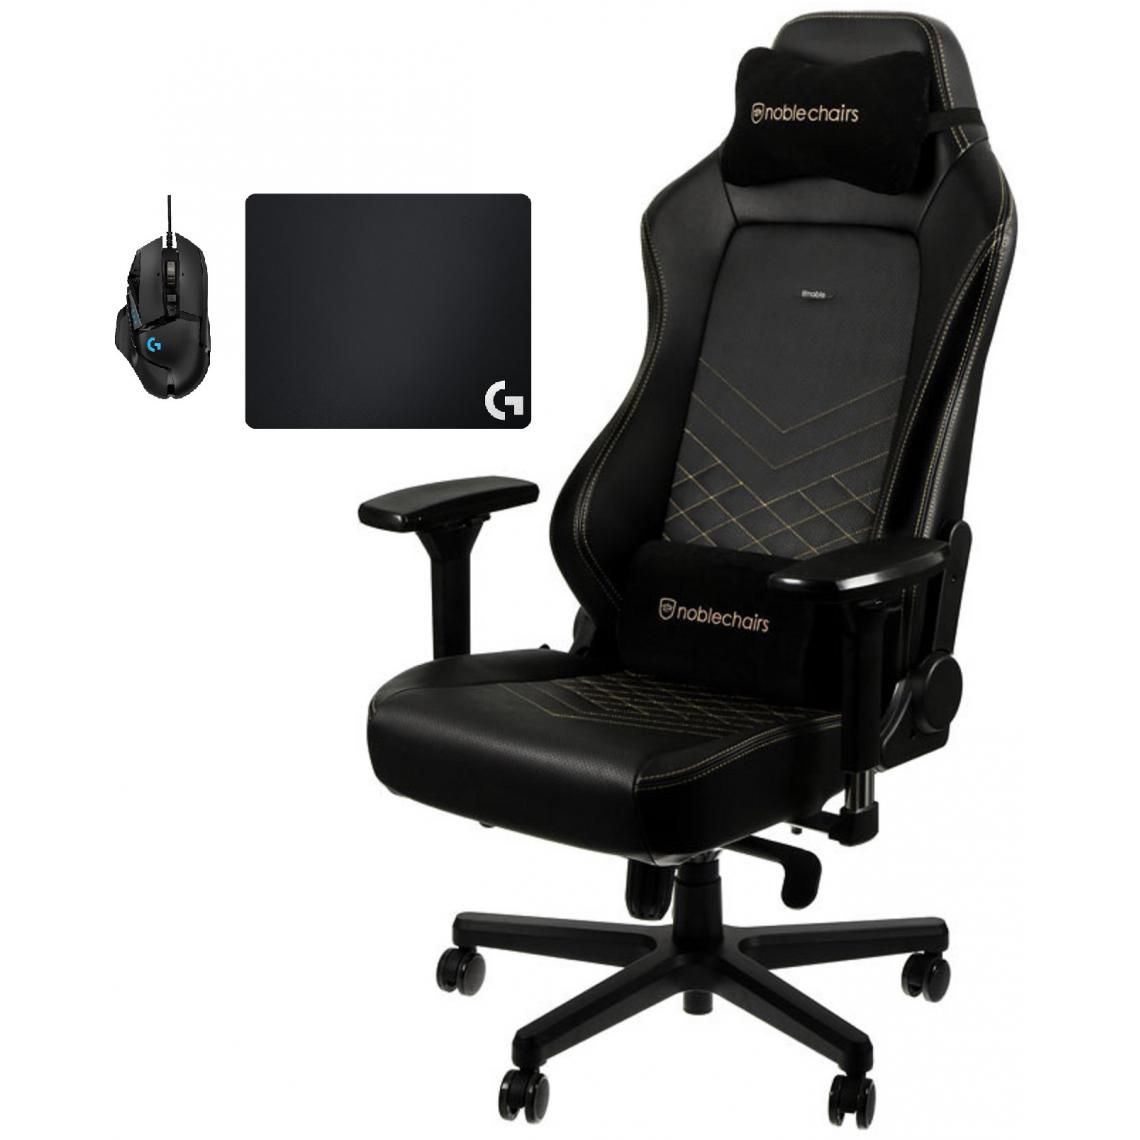 Noblechairs - Chaise Gamer HERO - Noir/Or + Souris G502 HERO + Tapis de souris G240 - Chaise gamer